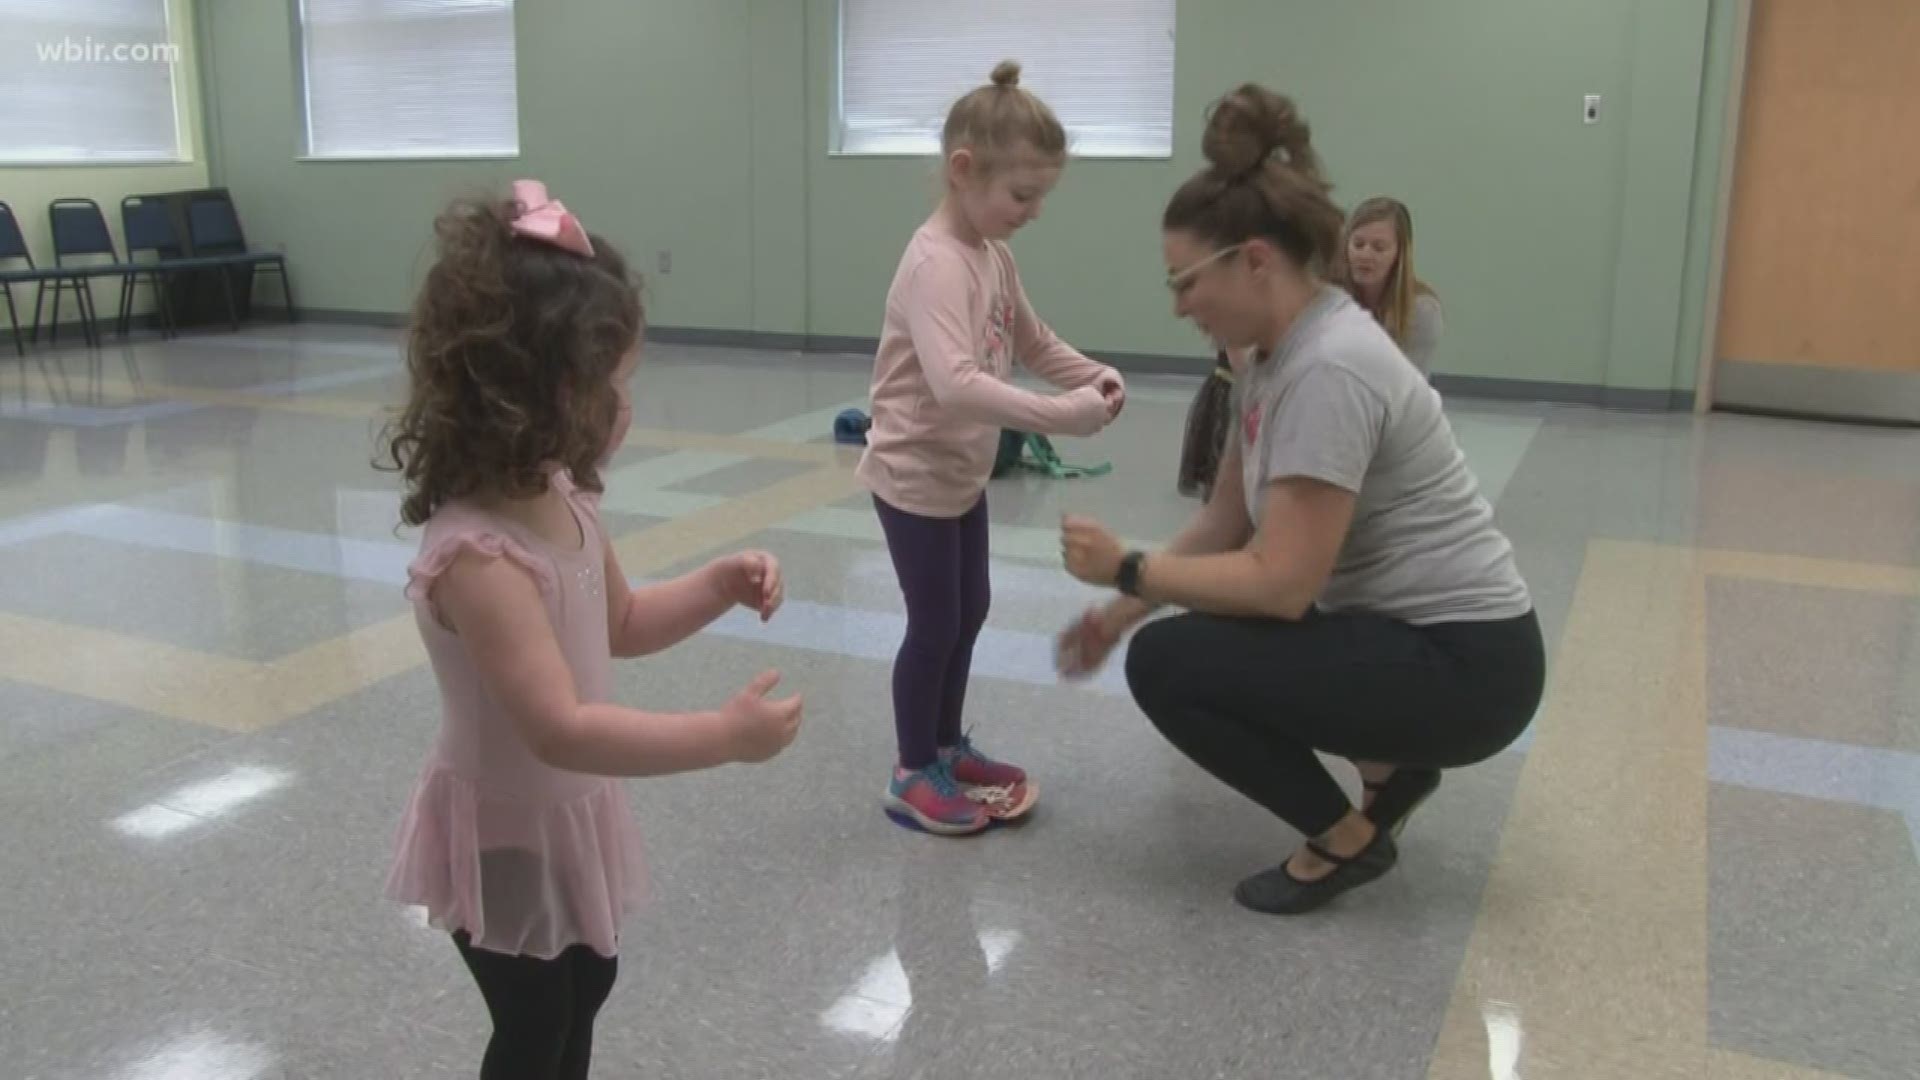 Amanda Riggs started Twinkle Toes Mobile Dance Company seven years ago. Instructors travel to teach at preschools, community centers, daycares and even the YMCA.